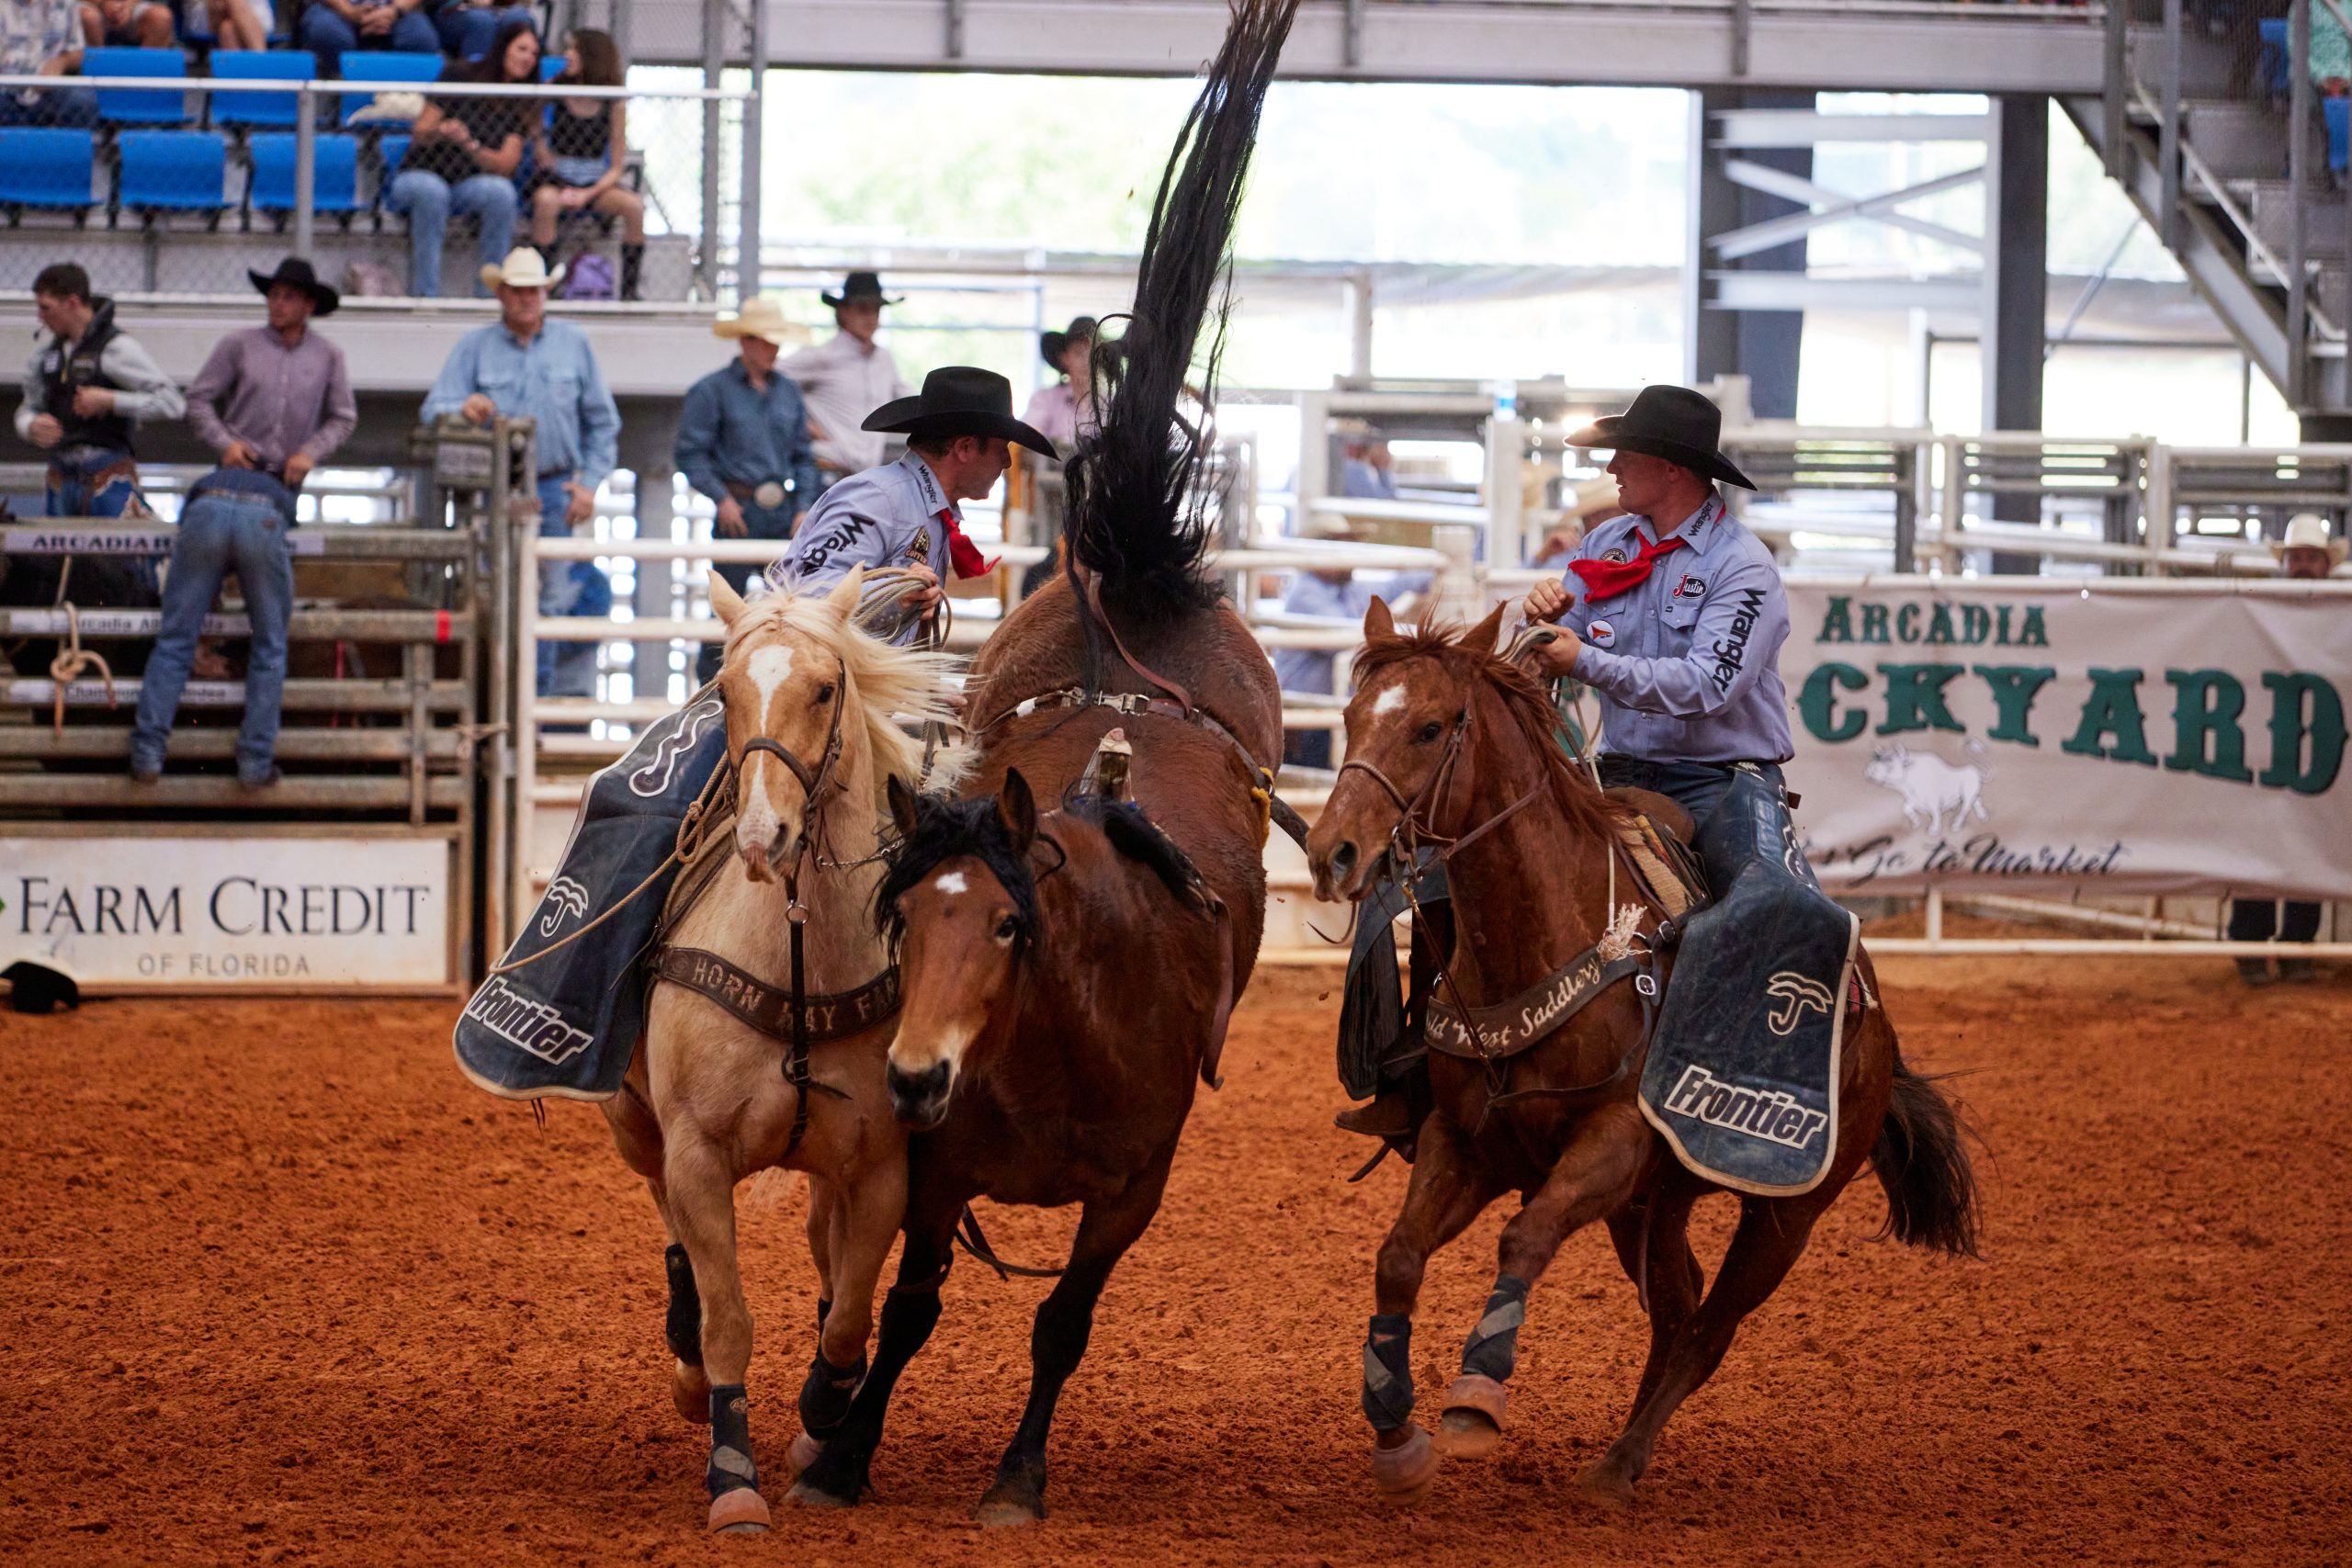 The 96th Annual Arcadia All-Florida Championship Rodeo